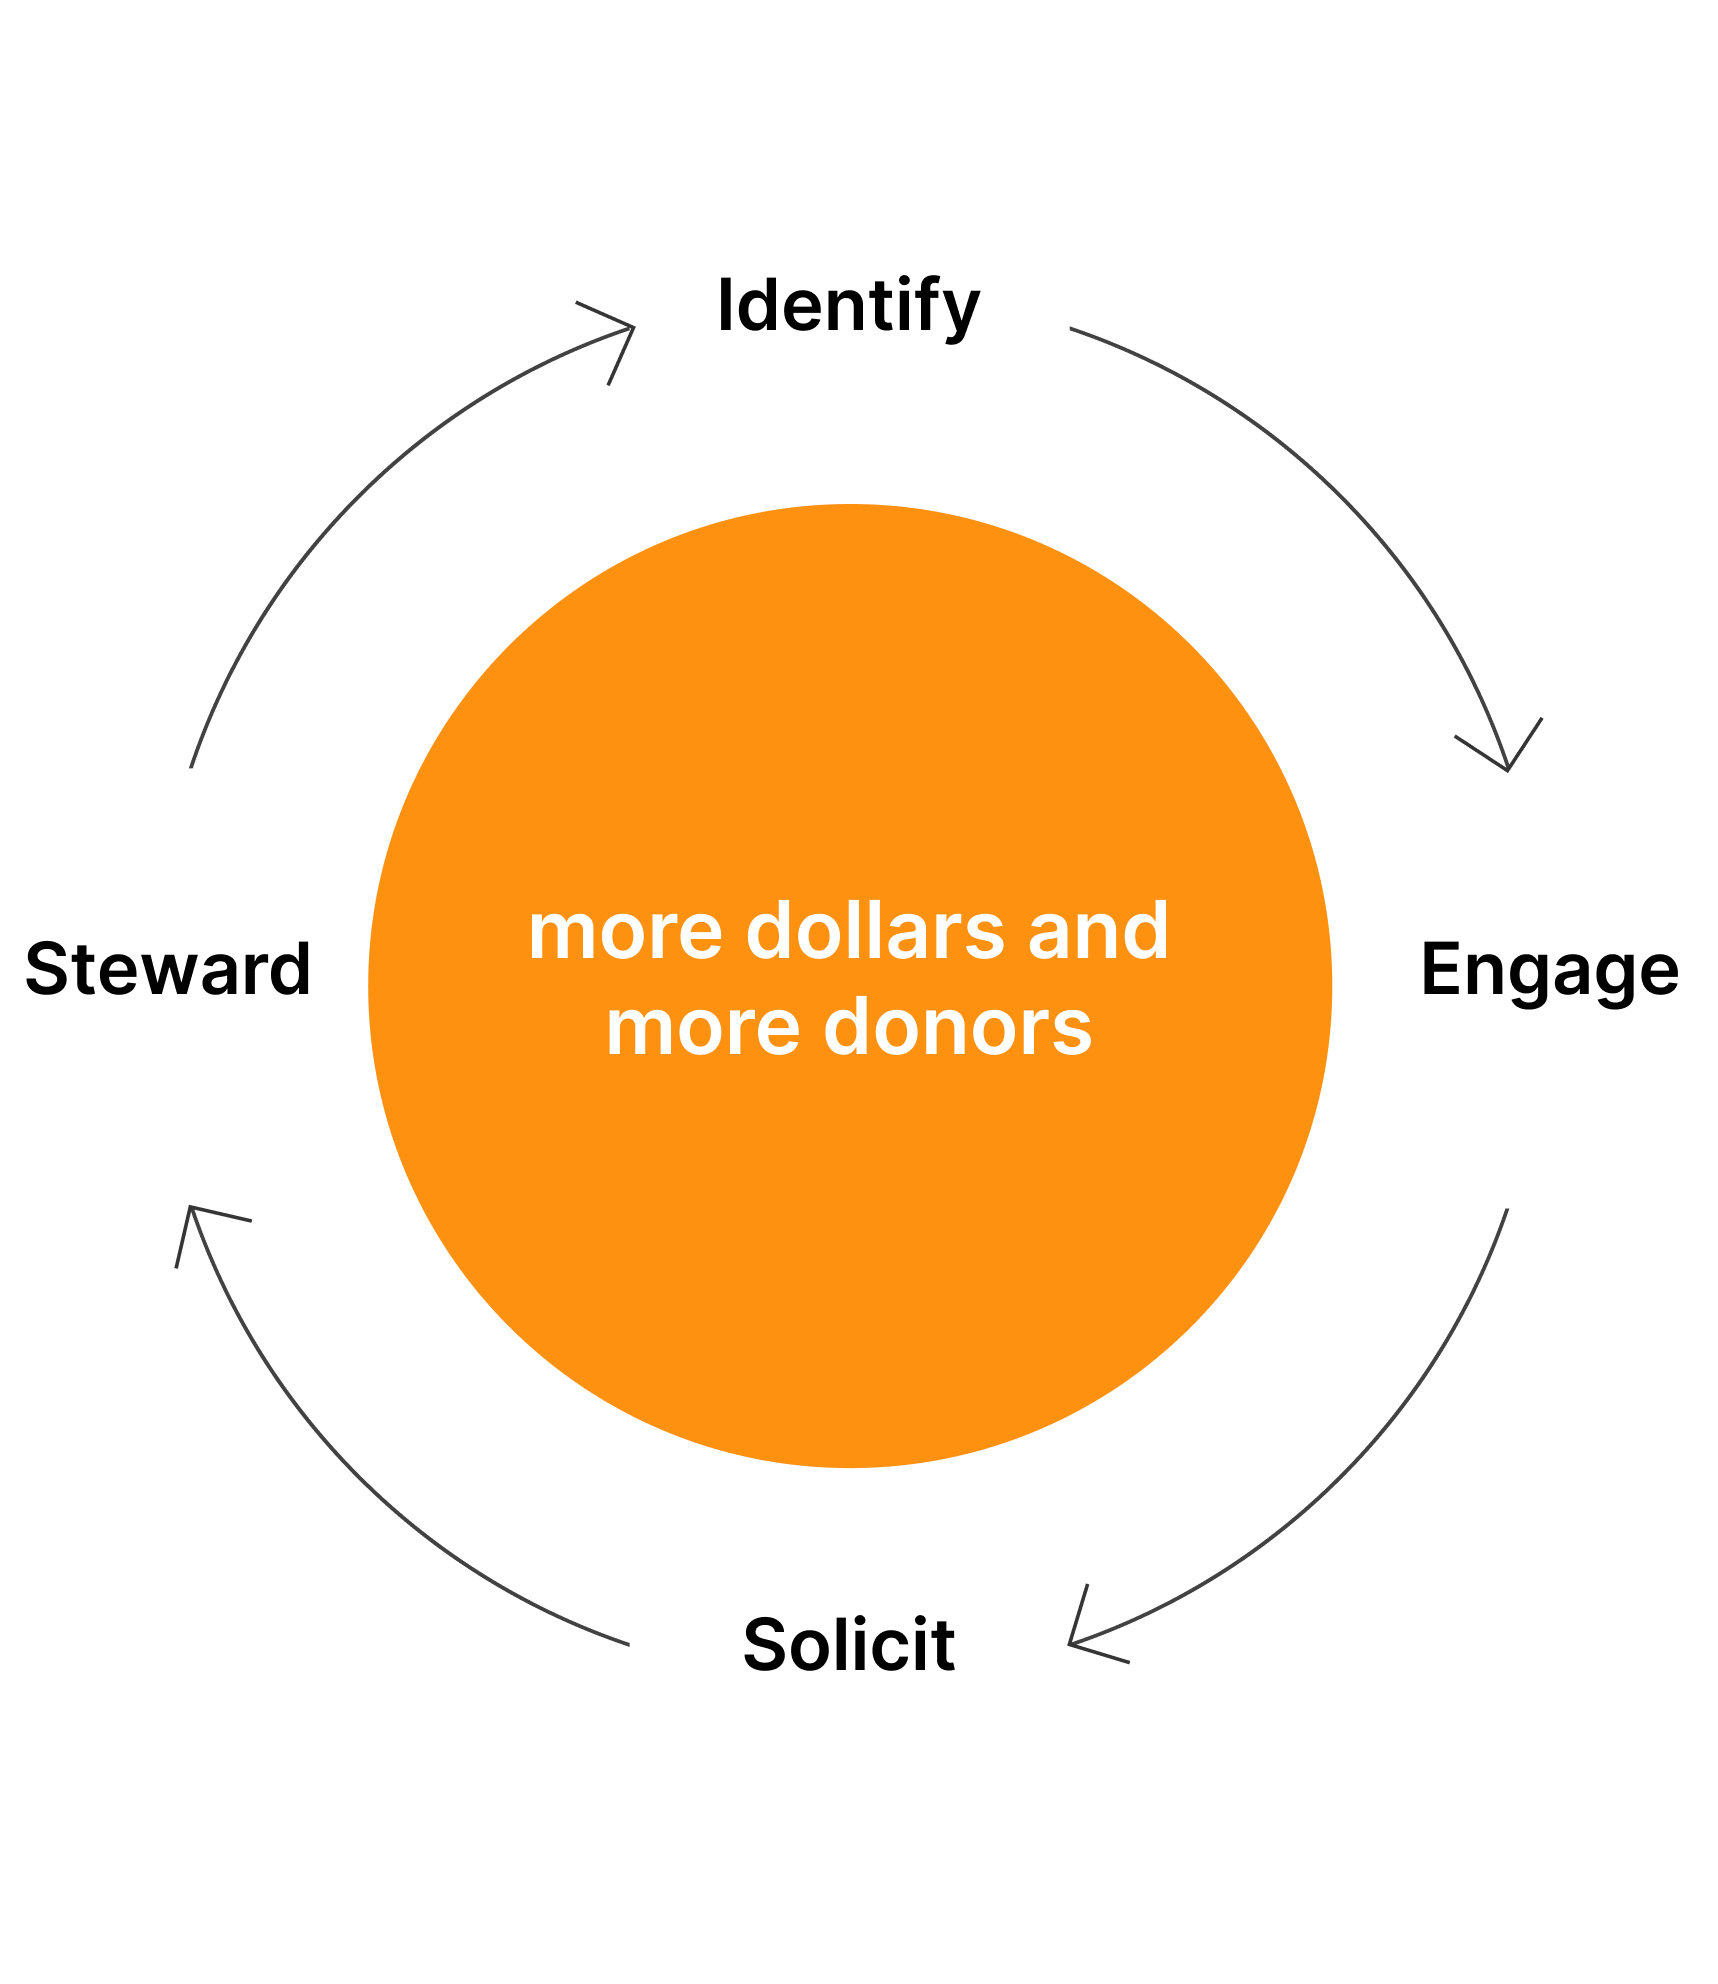 Donor lifecycle graphic illustrating four key fundraising workflows: identify, engage, solicit, and steward.